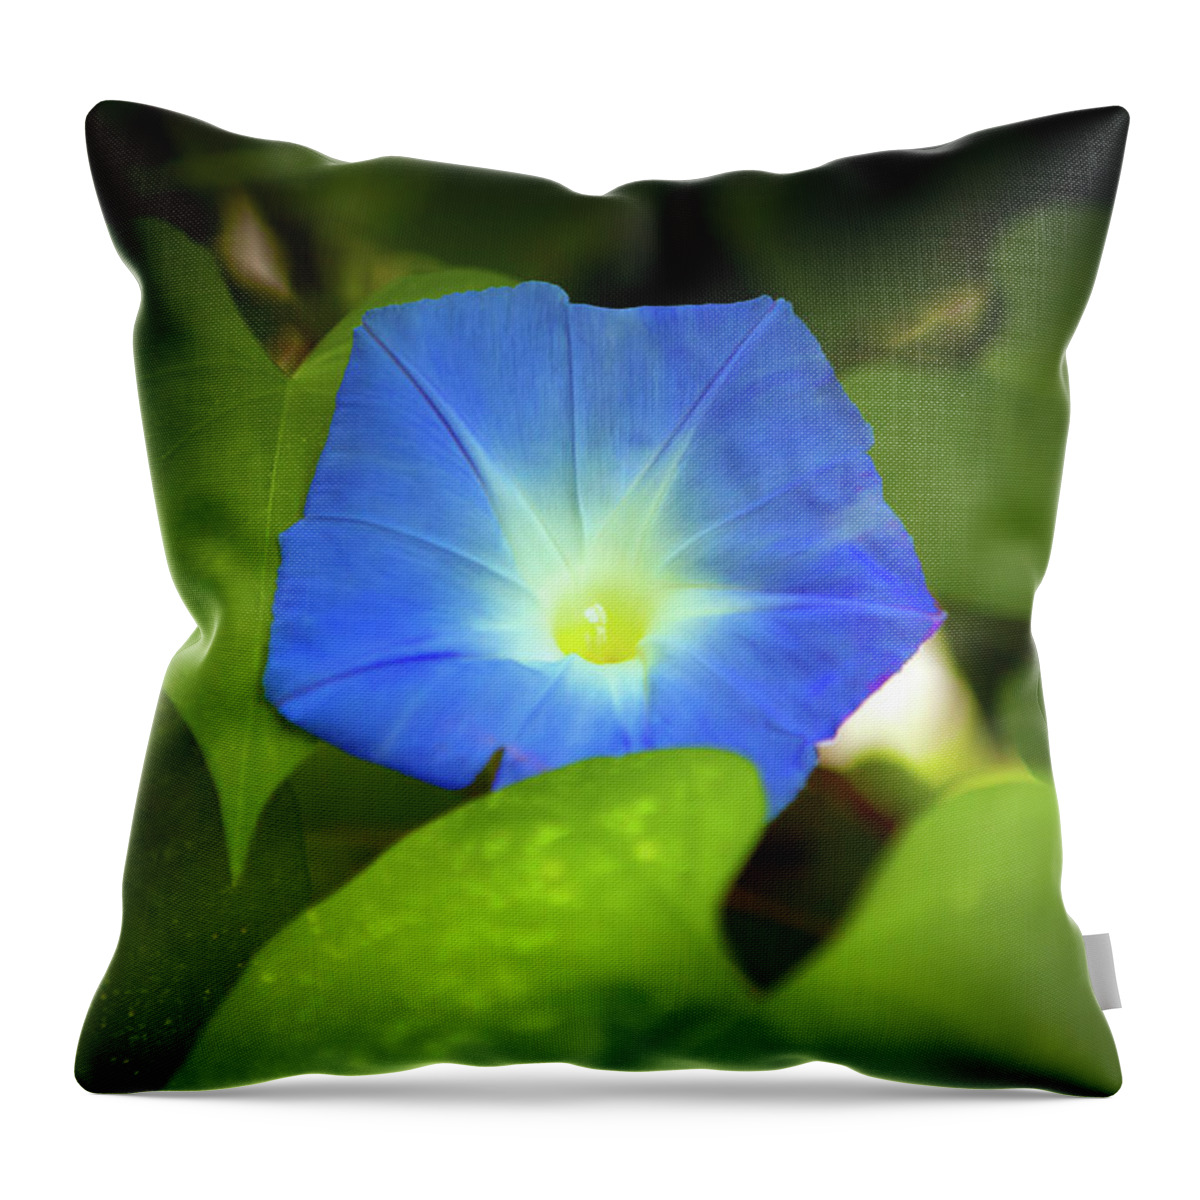 Morning Glory Throw Pillow featuring the photograph Morning Glory_4757 by Rocco Leone